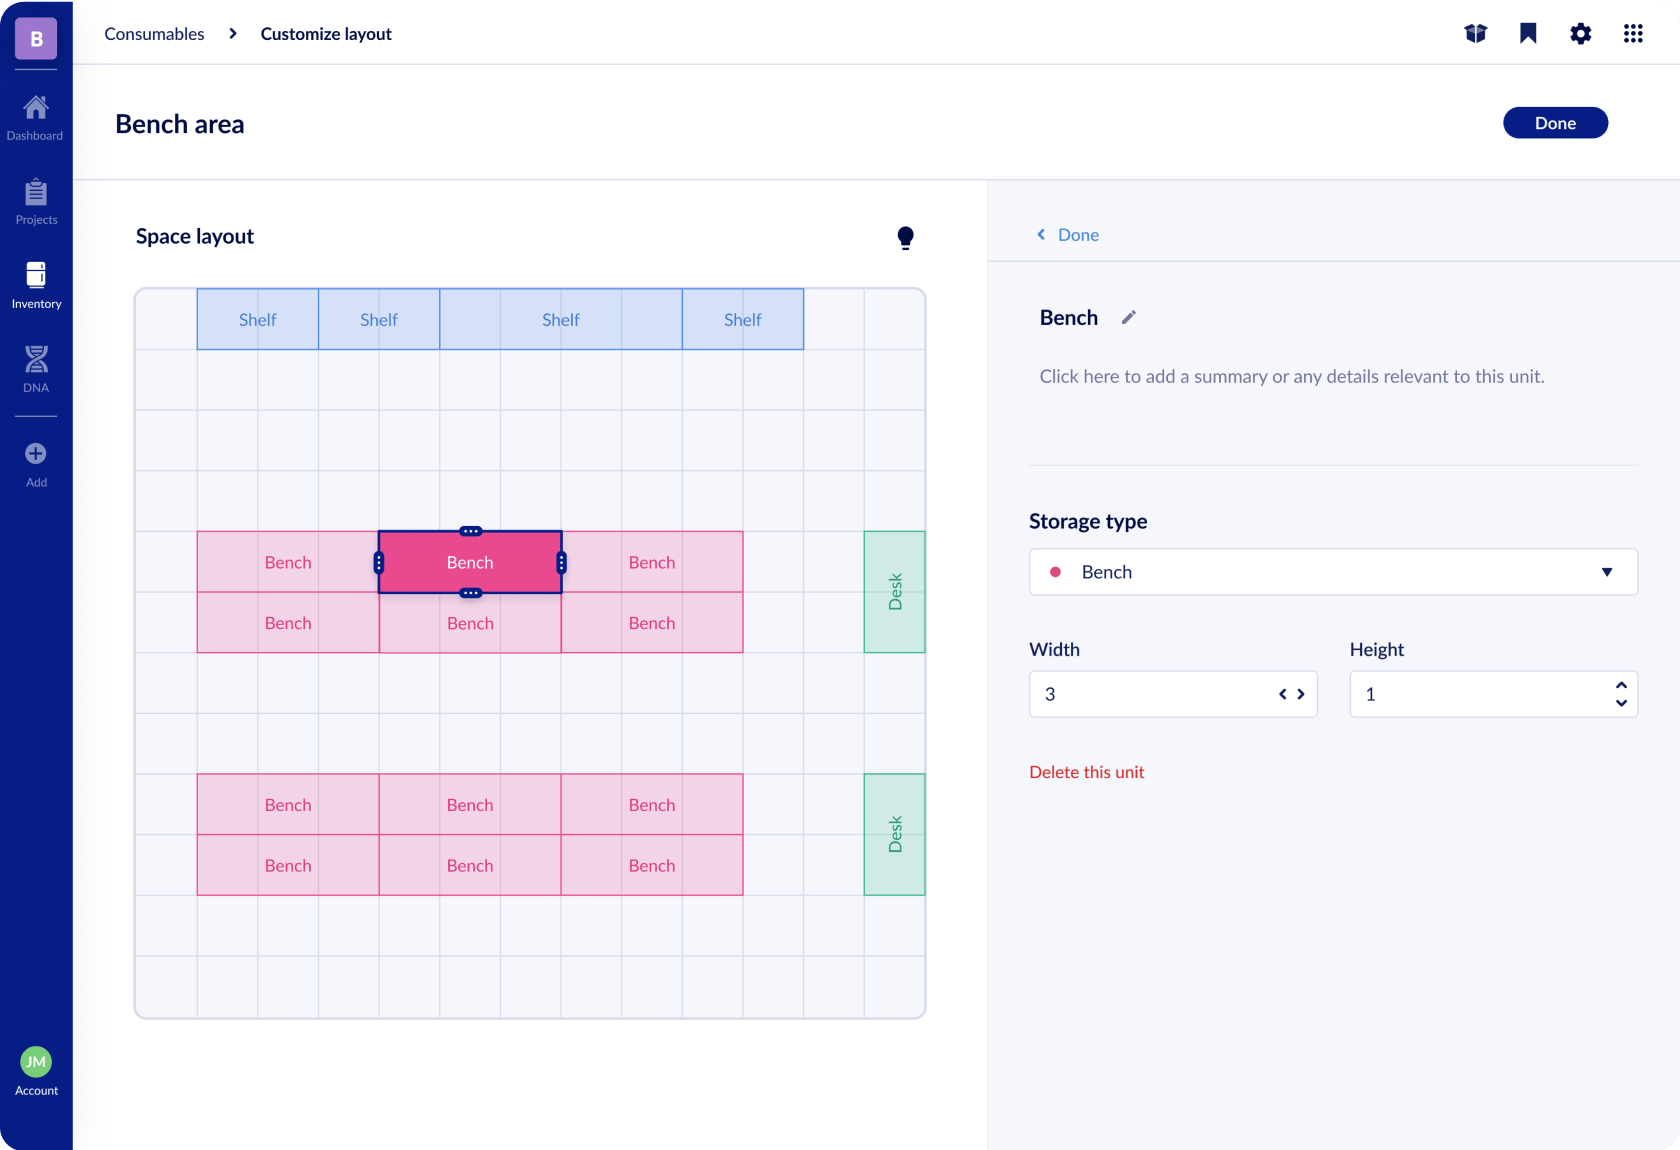 Easily Manage and Submit Orders